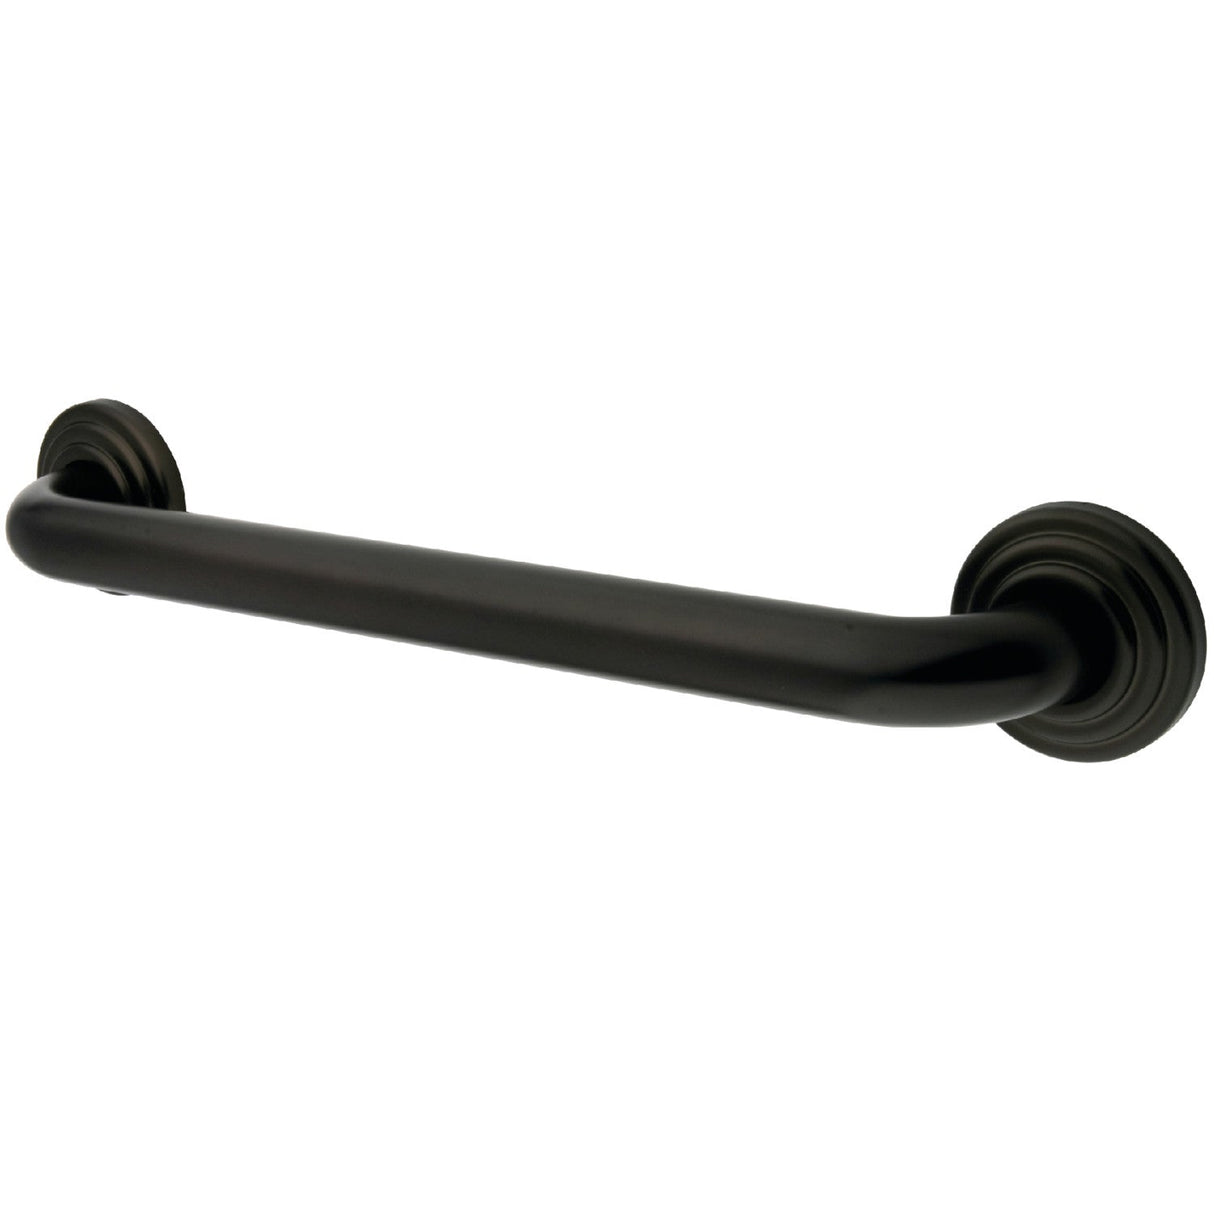 Restoration Thrive In Place DR314365 36-Inch X 1-1/4 Inch O.D Grab Bar, Oil Rubbed Bronze